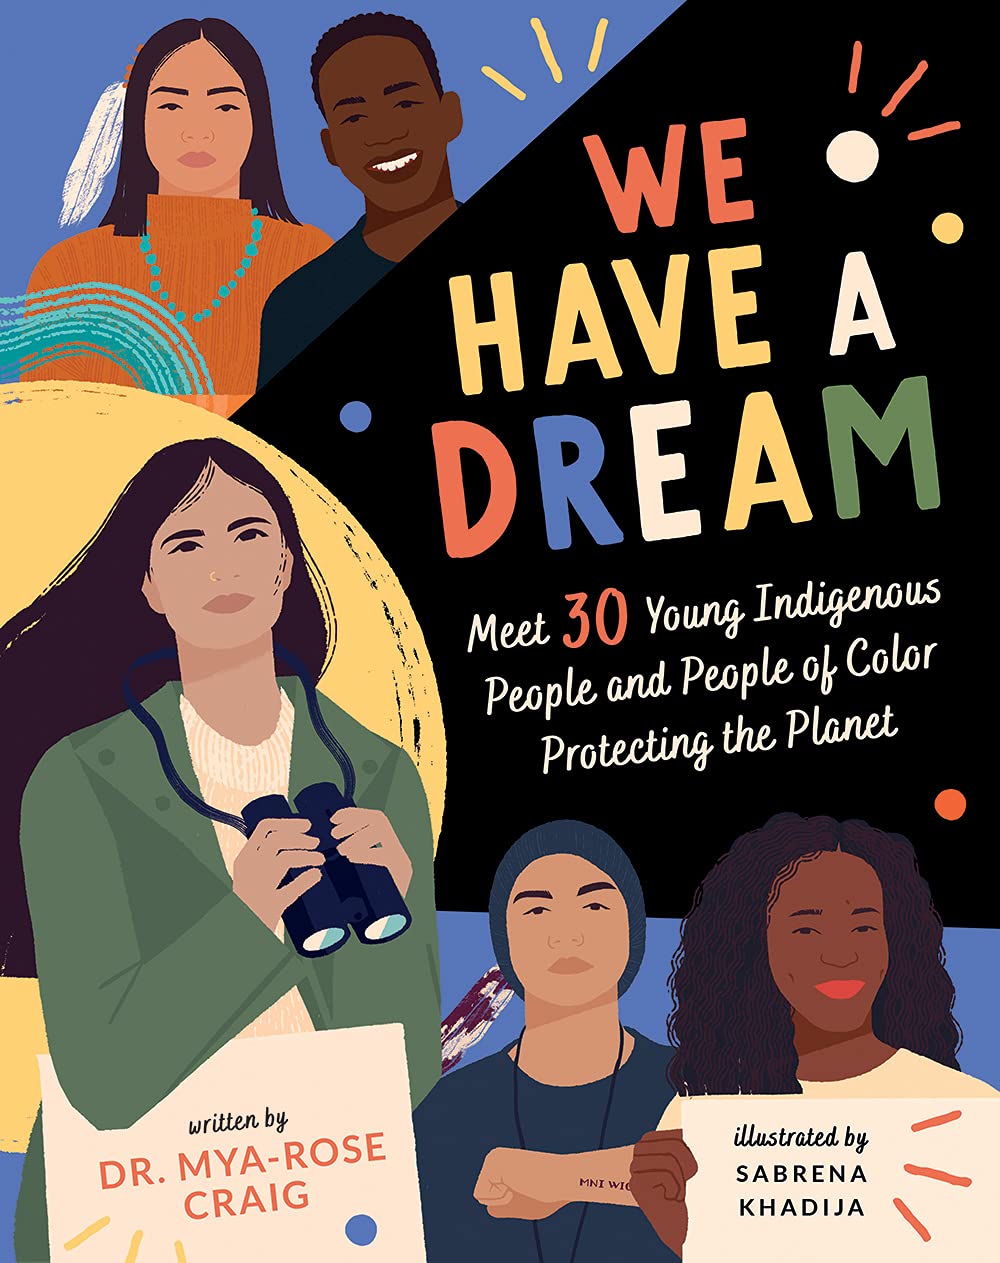  We Have a Dream: Meet 30 Young Indigenous People and People of Color Protecting the Planet  by Dr. Mya-Rose Craig